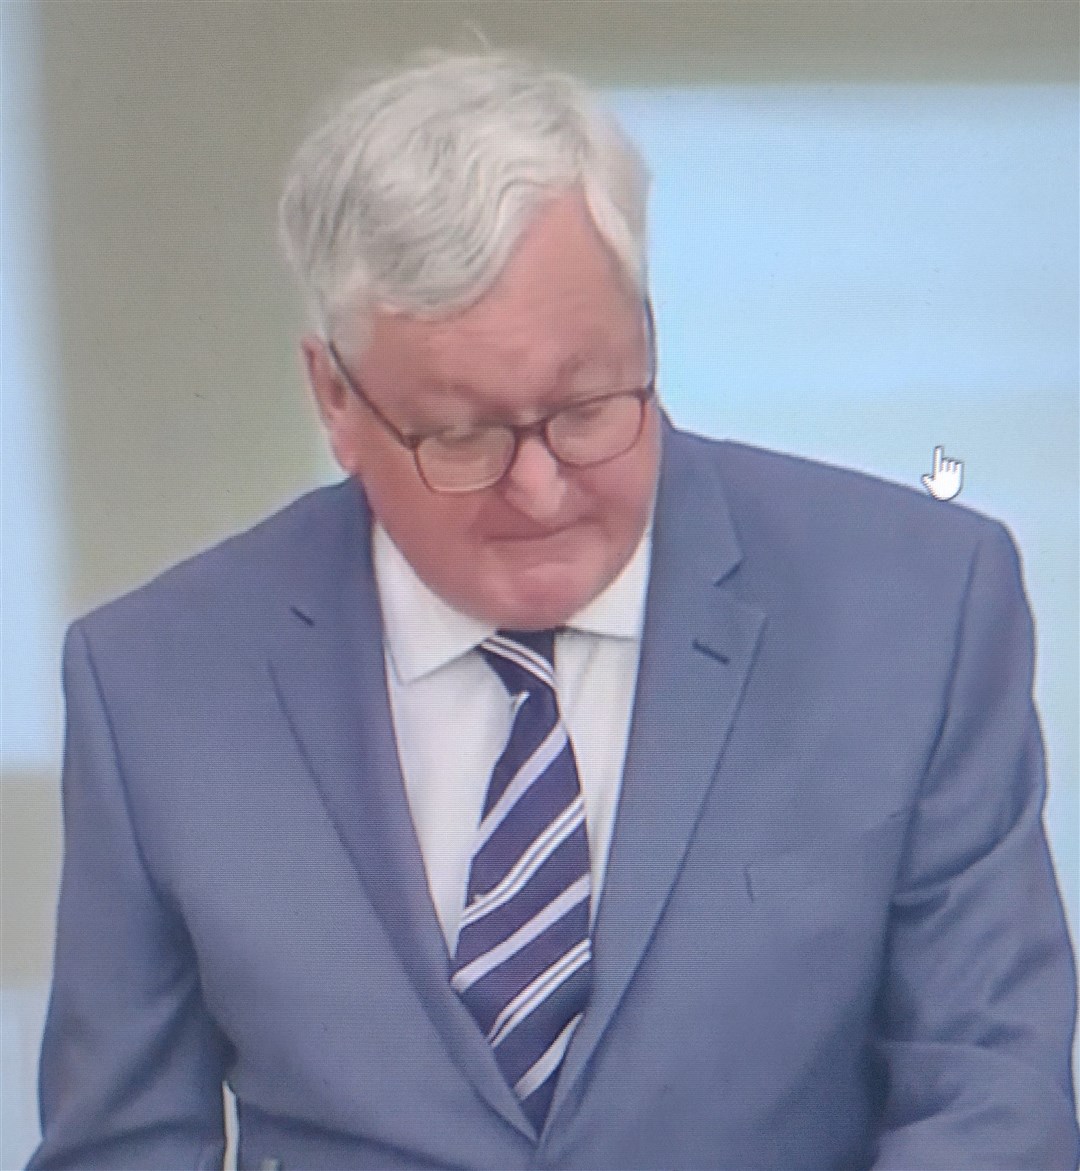 TRIBUTE: Fergus Ewing MSP paid a tribute to Rod this evening